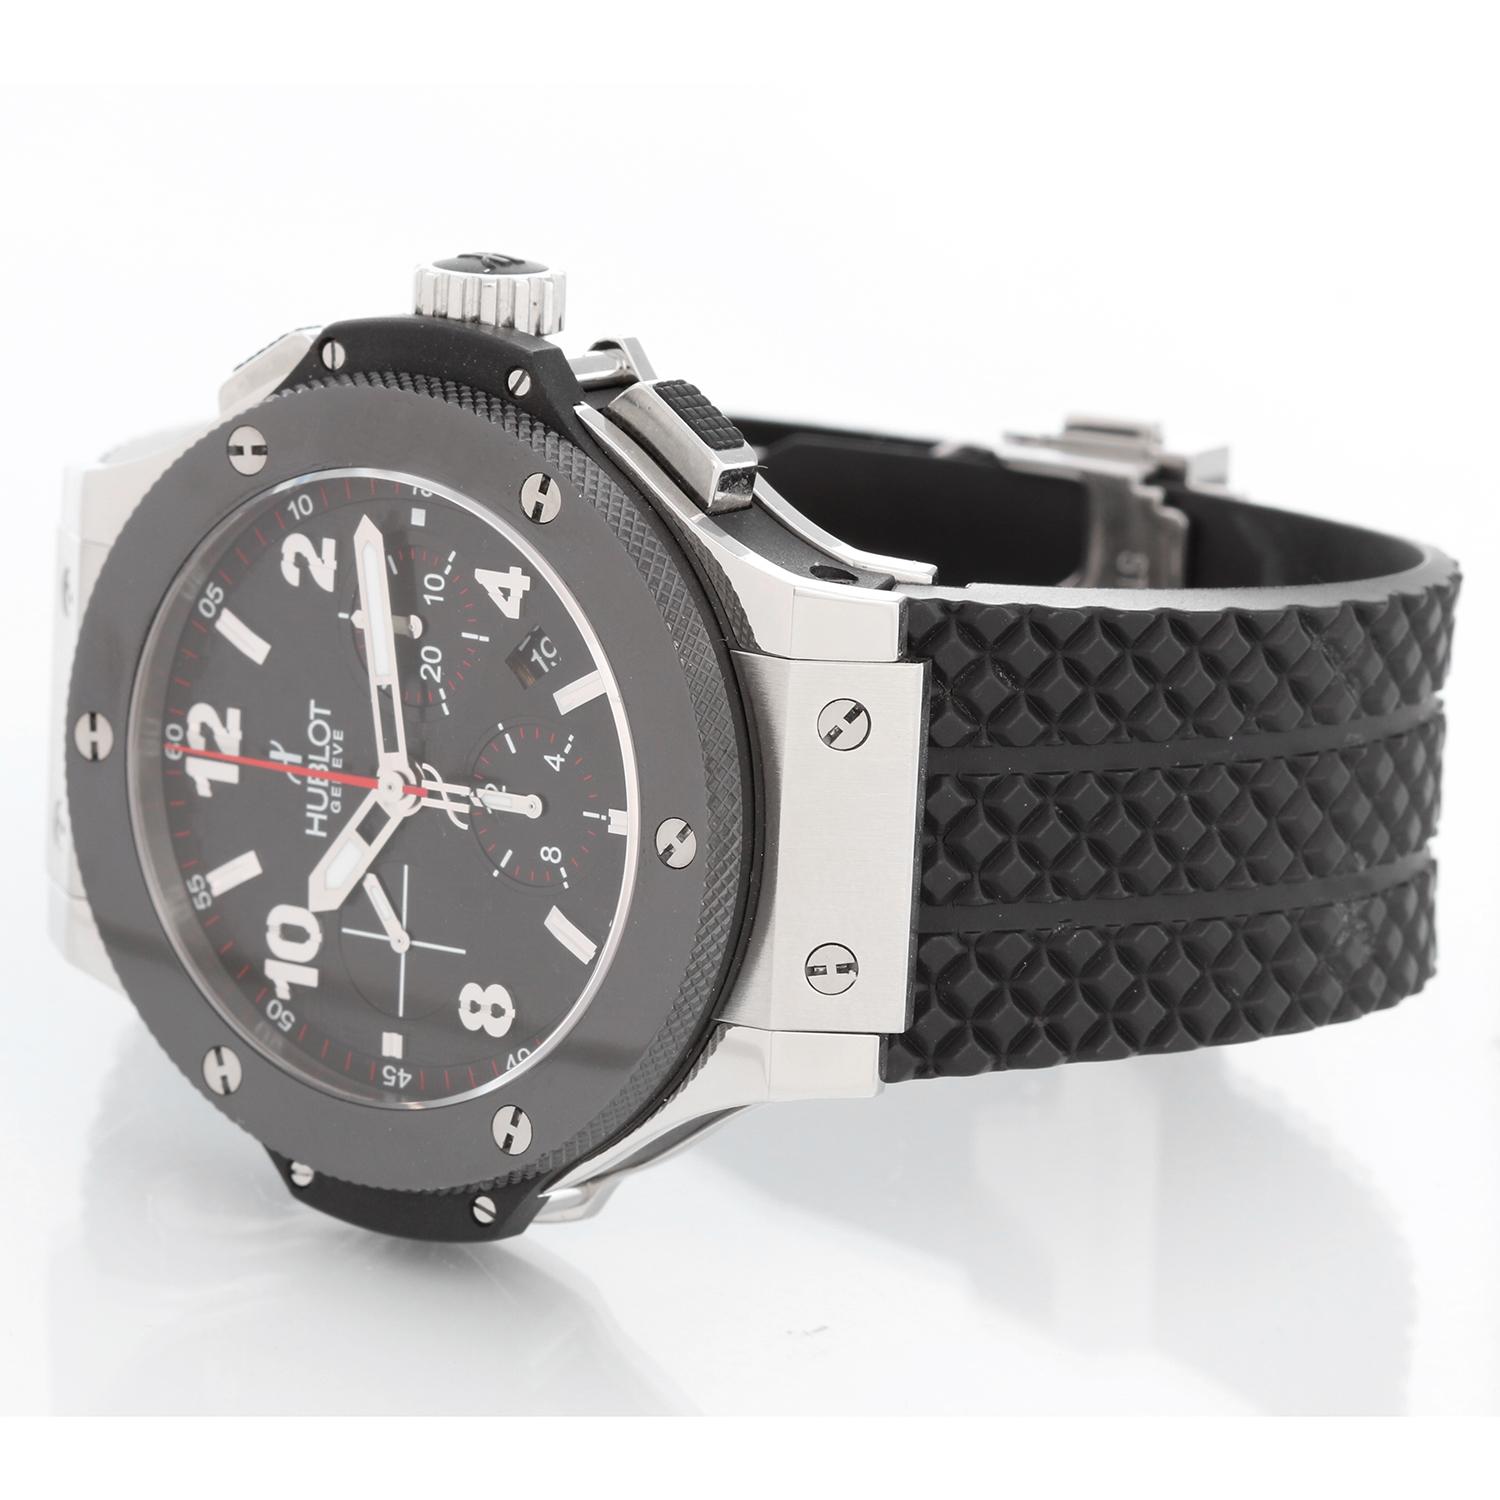 Hublot Big Bang Steel & Ceramic Men's Watch 301.SB.131.RX - Automatic; chronograph. Stainless steel case with polished black ceramic bezel ( 44 mm ) . Black carbon fiber dial. Black Rubber Strap with Hublot deployant. Pre-owned with Hublot box and